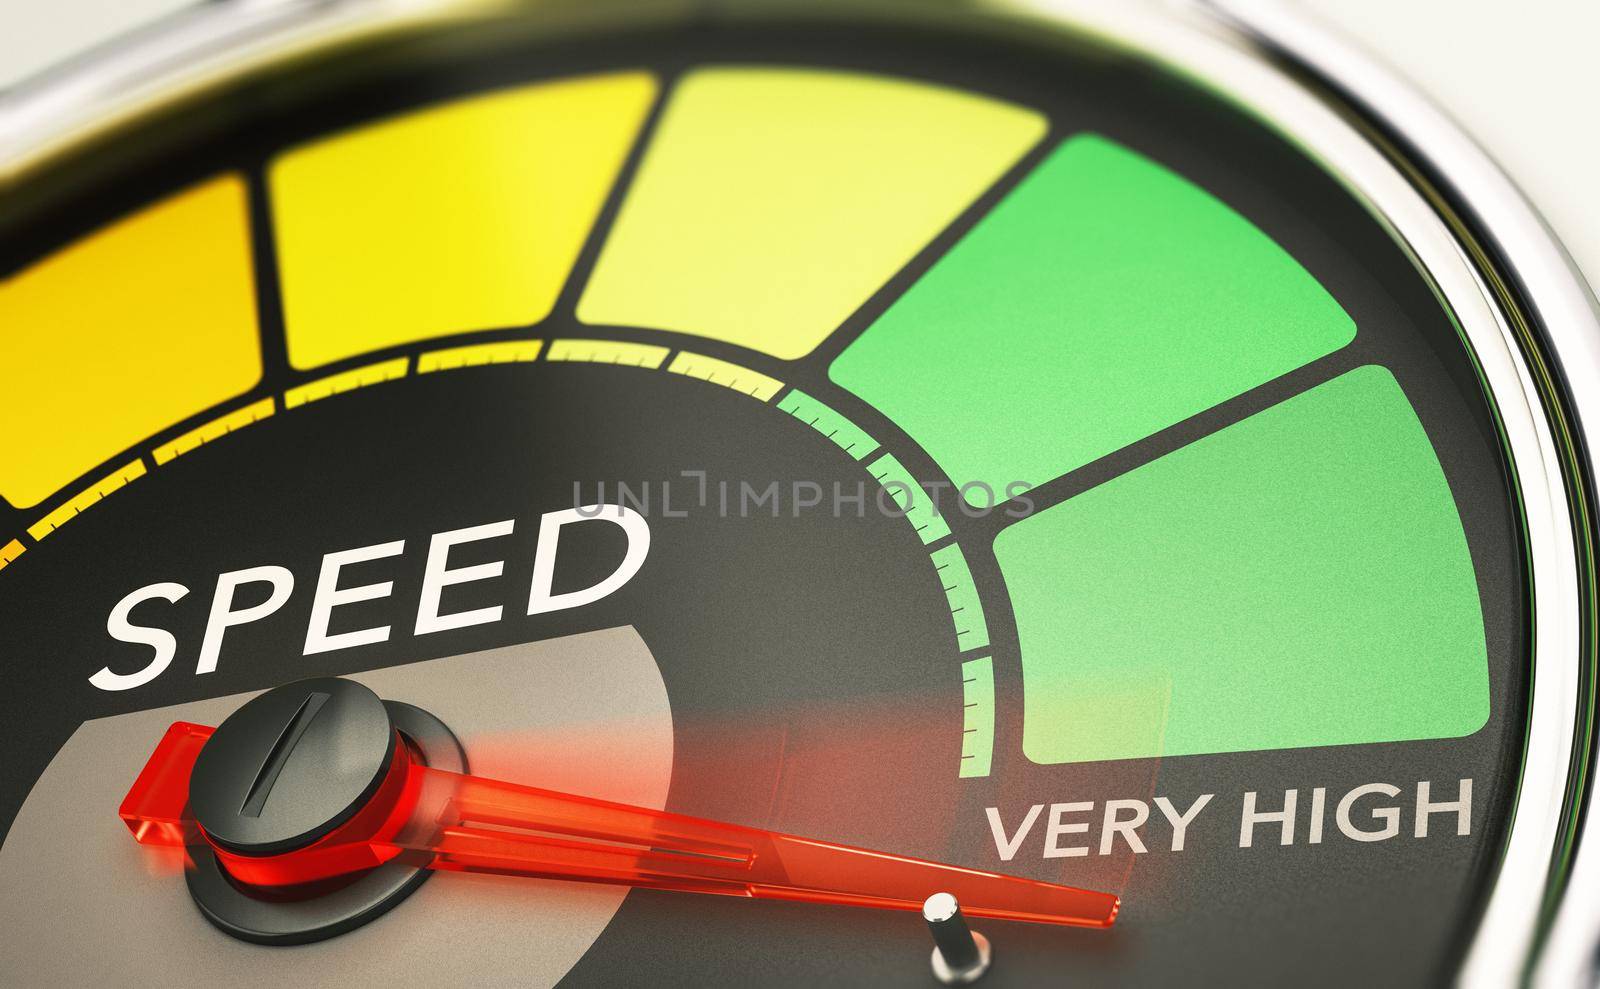 Gauge with needle pointing very high speed. Speeding up internet connection concept. 3d illustration.